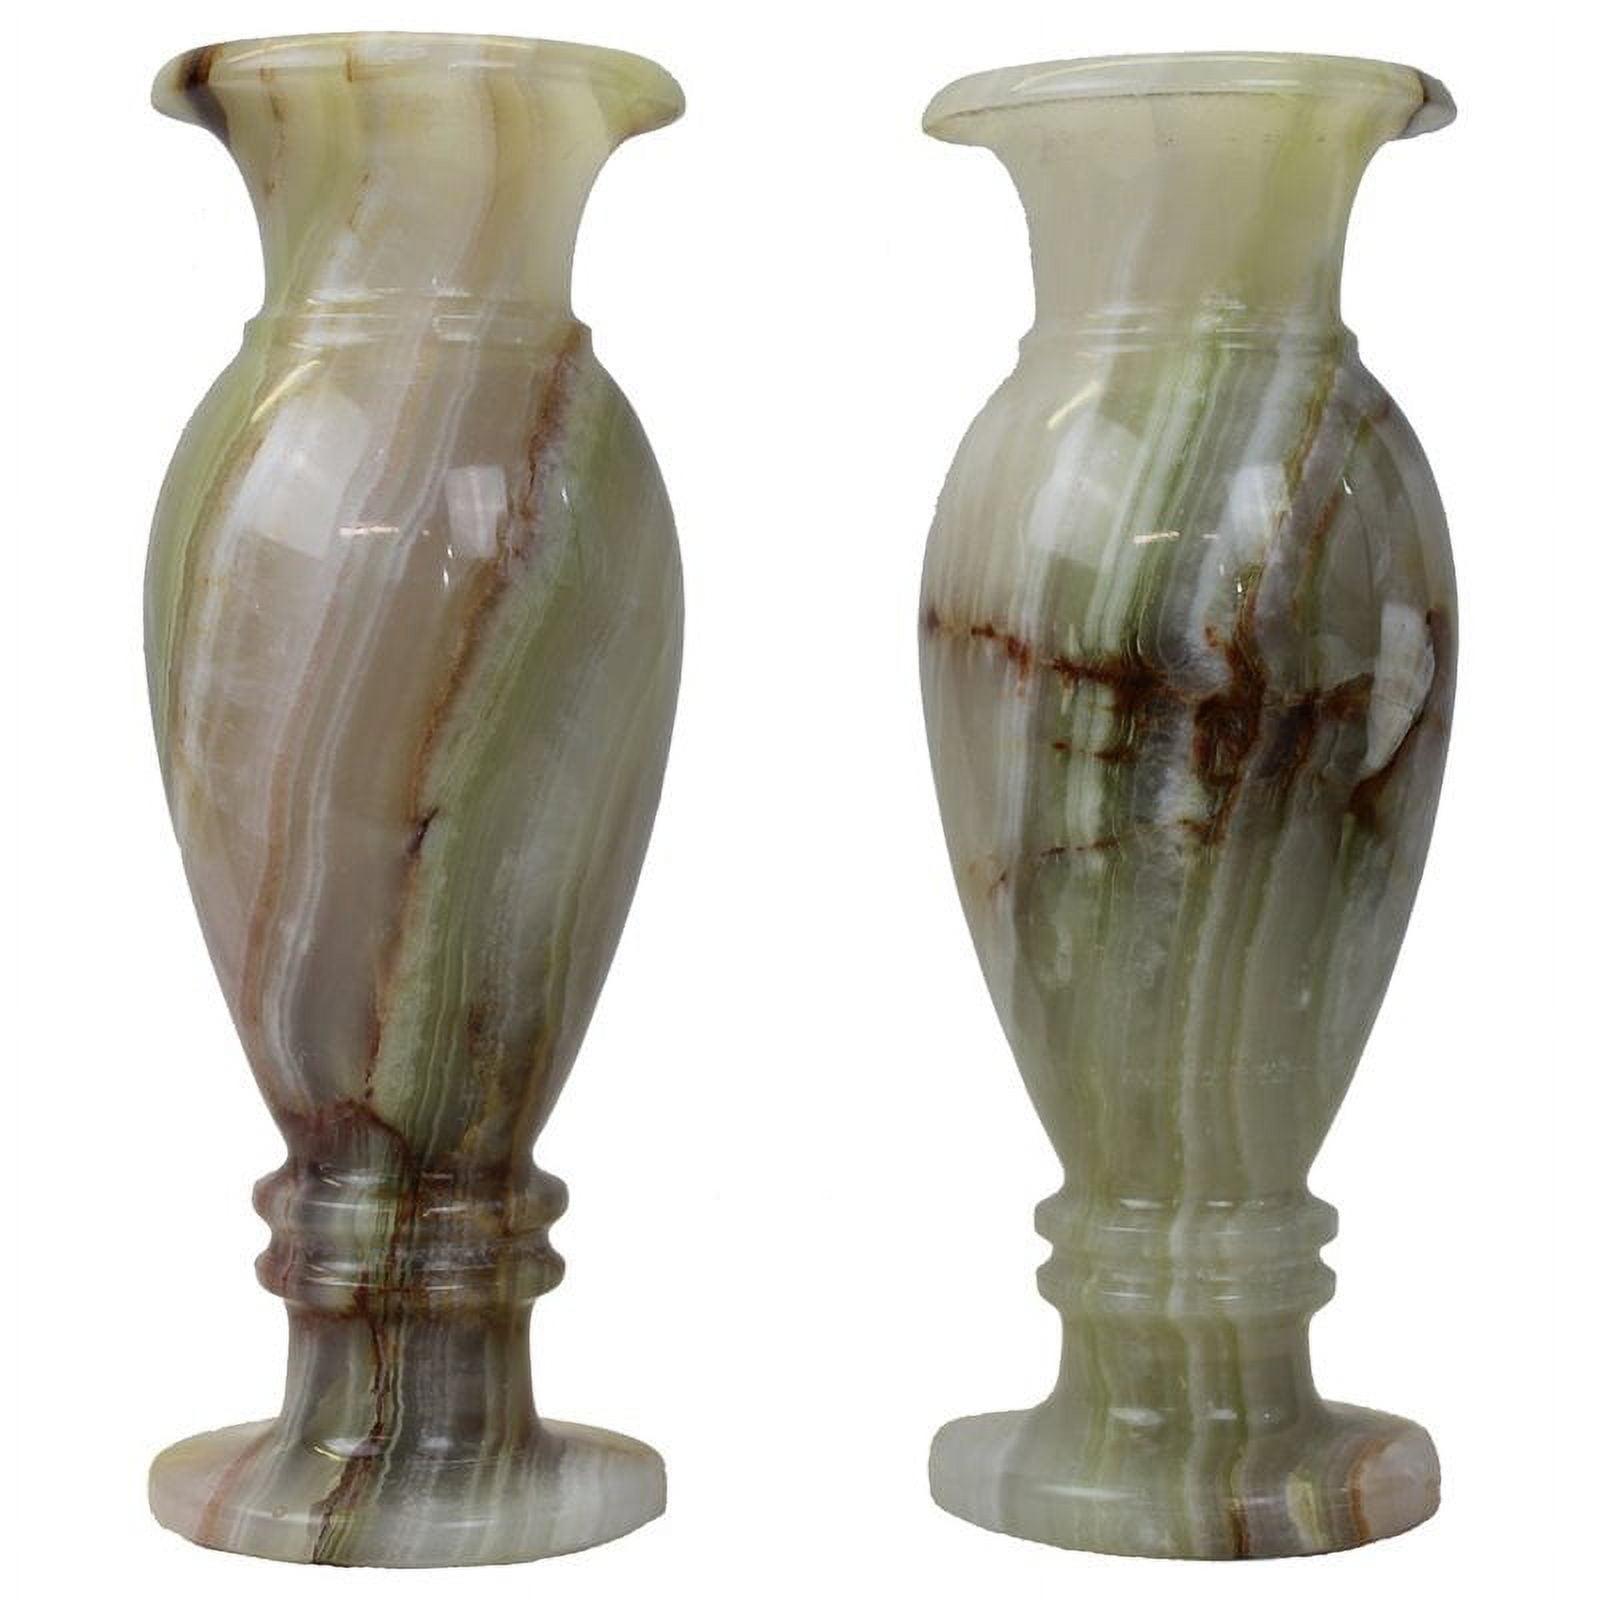 Natural Geo Handcrafted Onyx Multi-Color 8" Table Vase Set